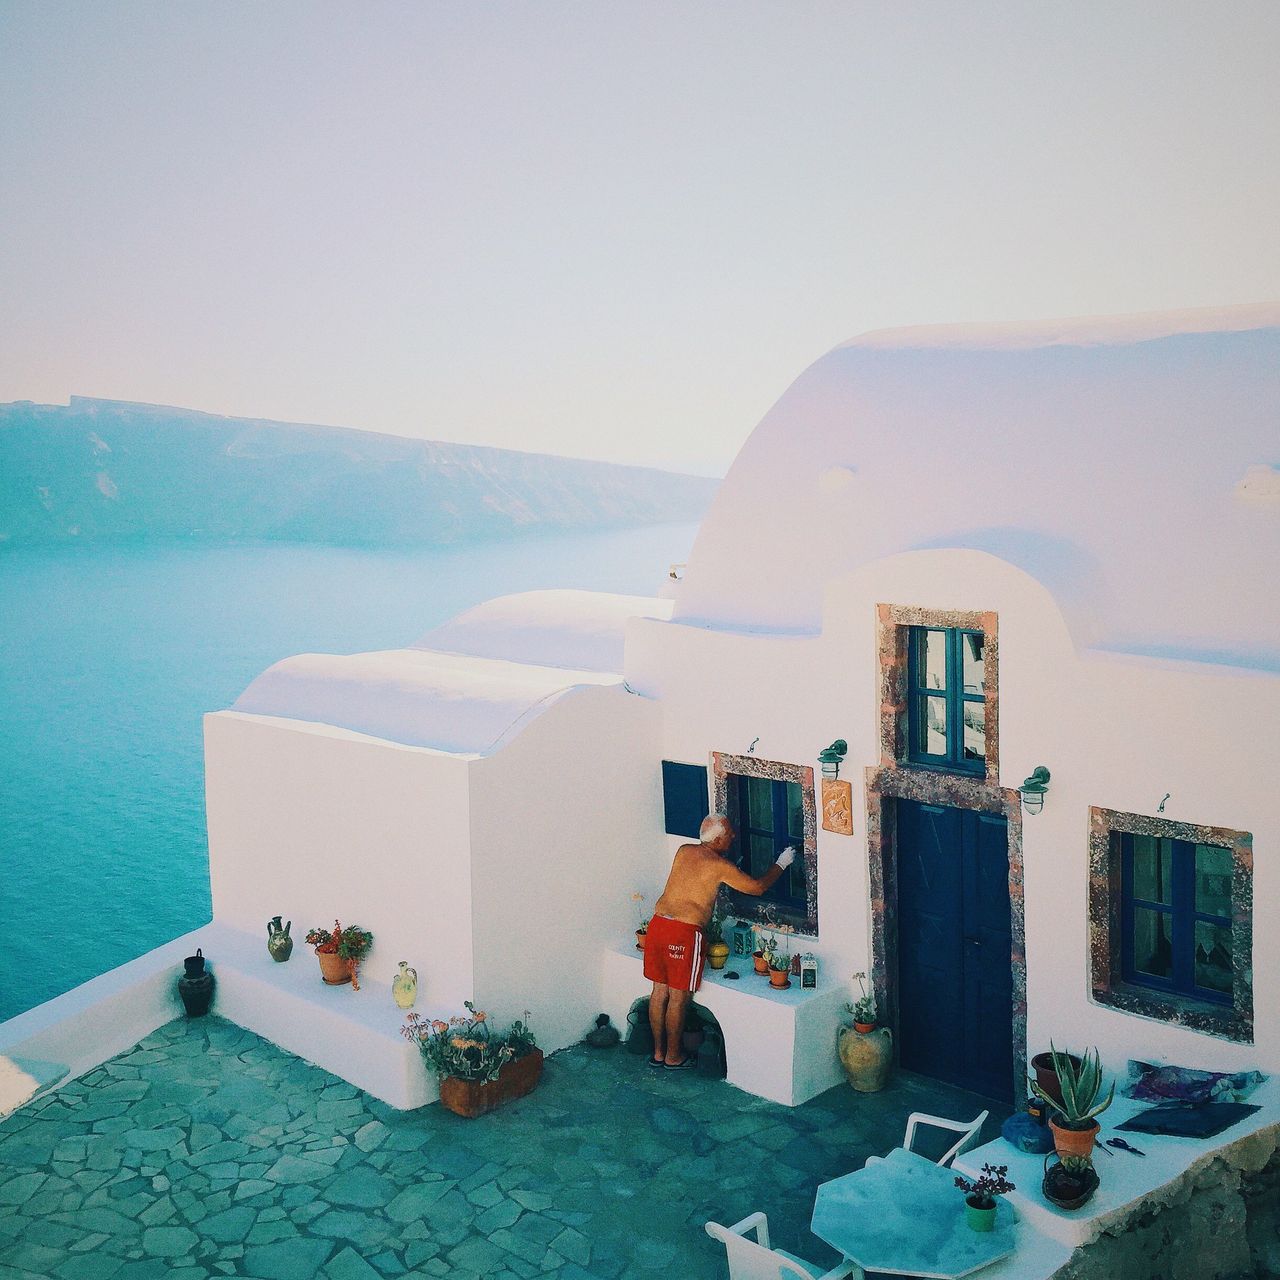 YuMing Guan. Guangdong, China. <strong>2nd Place – Lifestyle.<br><br><em><br></em></strong><em>“This picture was taken in the summer of 2015, in Oia, a beautiful small town of Santorini. Tourists from around the globe gathered at the cliff to see the breathtaking sunset that is known as one of the Greatest Views in the World. Everyone was amazed by the stunning moment with awe and applauds, that’s when this local old man caught my attention. He was so concentrated and undisturbed, as if no crowd or view deserves his attention better than his own windowsill. I guess perhaps in his mind, the Greatest View in the World is HOME.”</em><strong><br></strong>